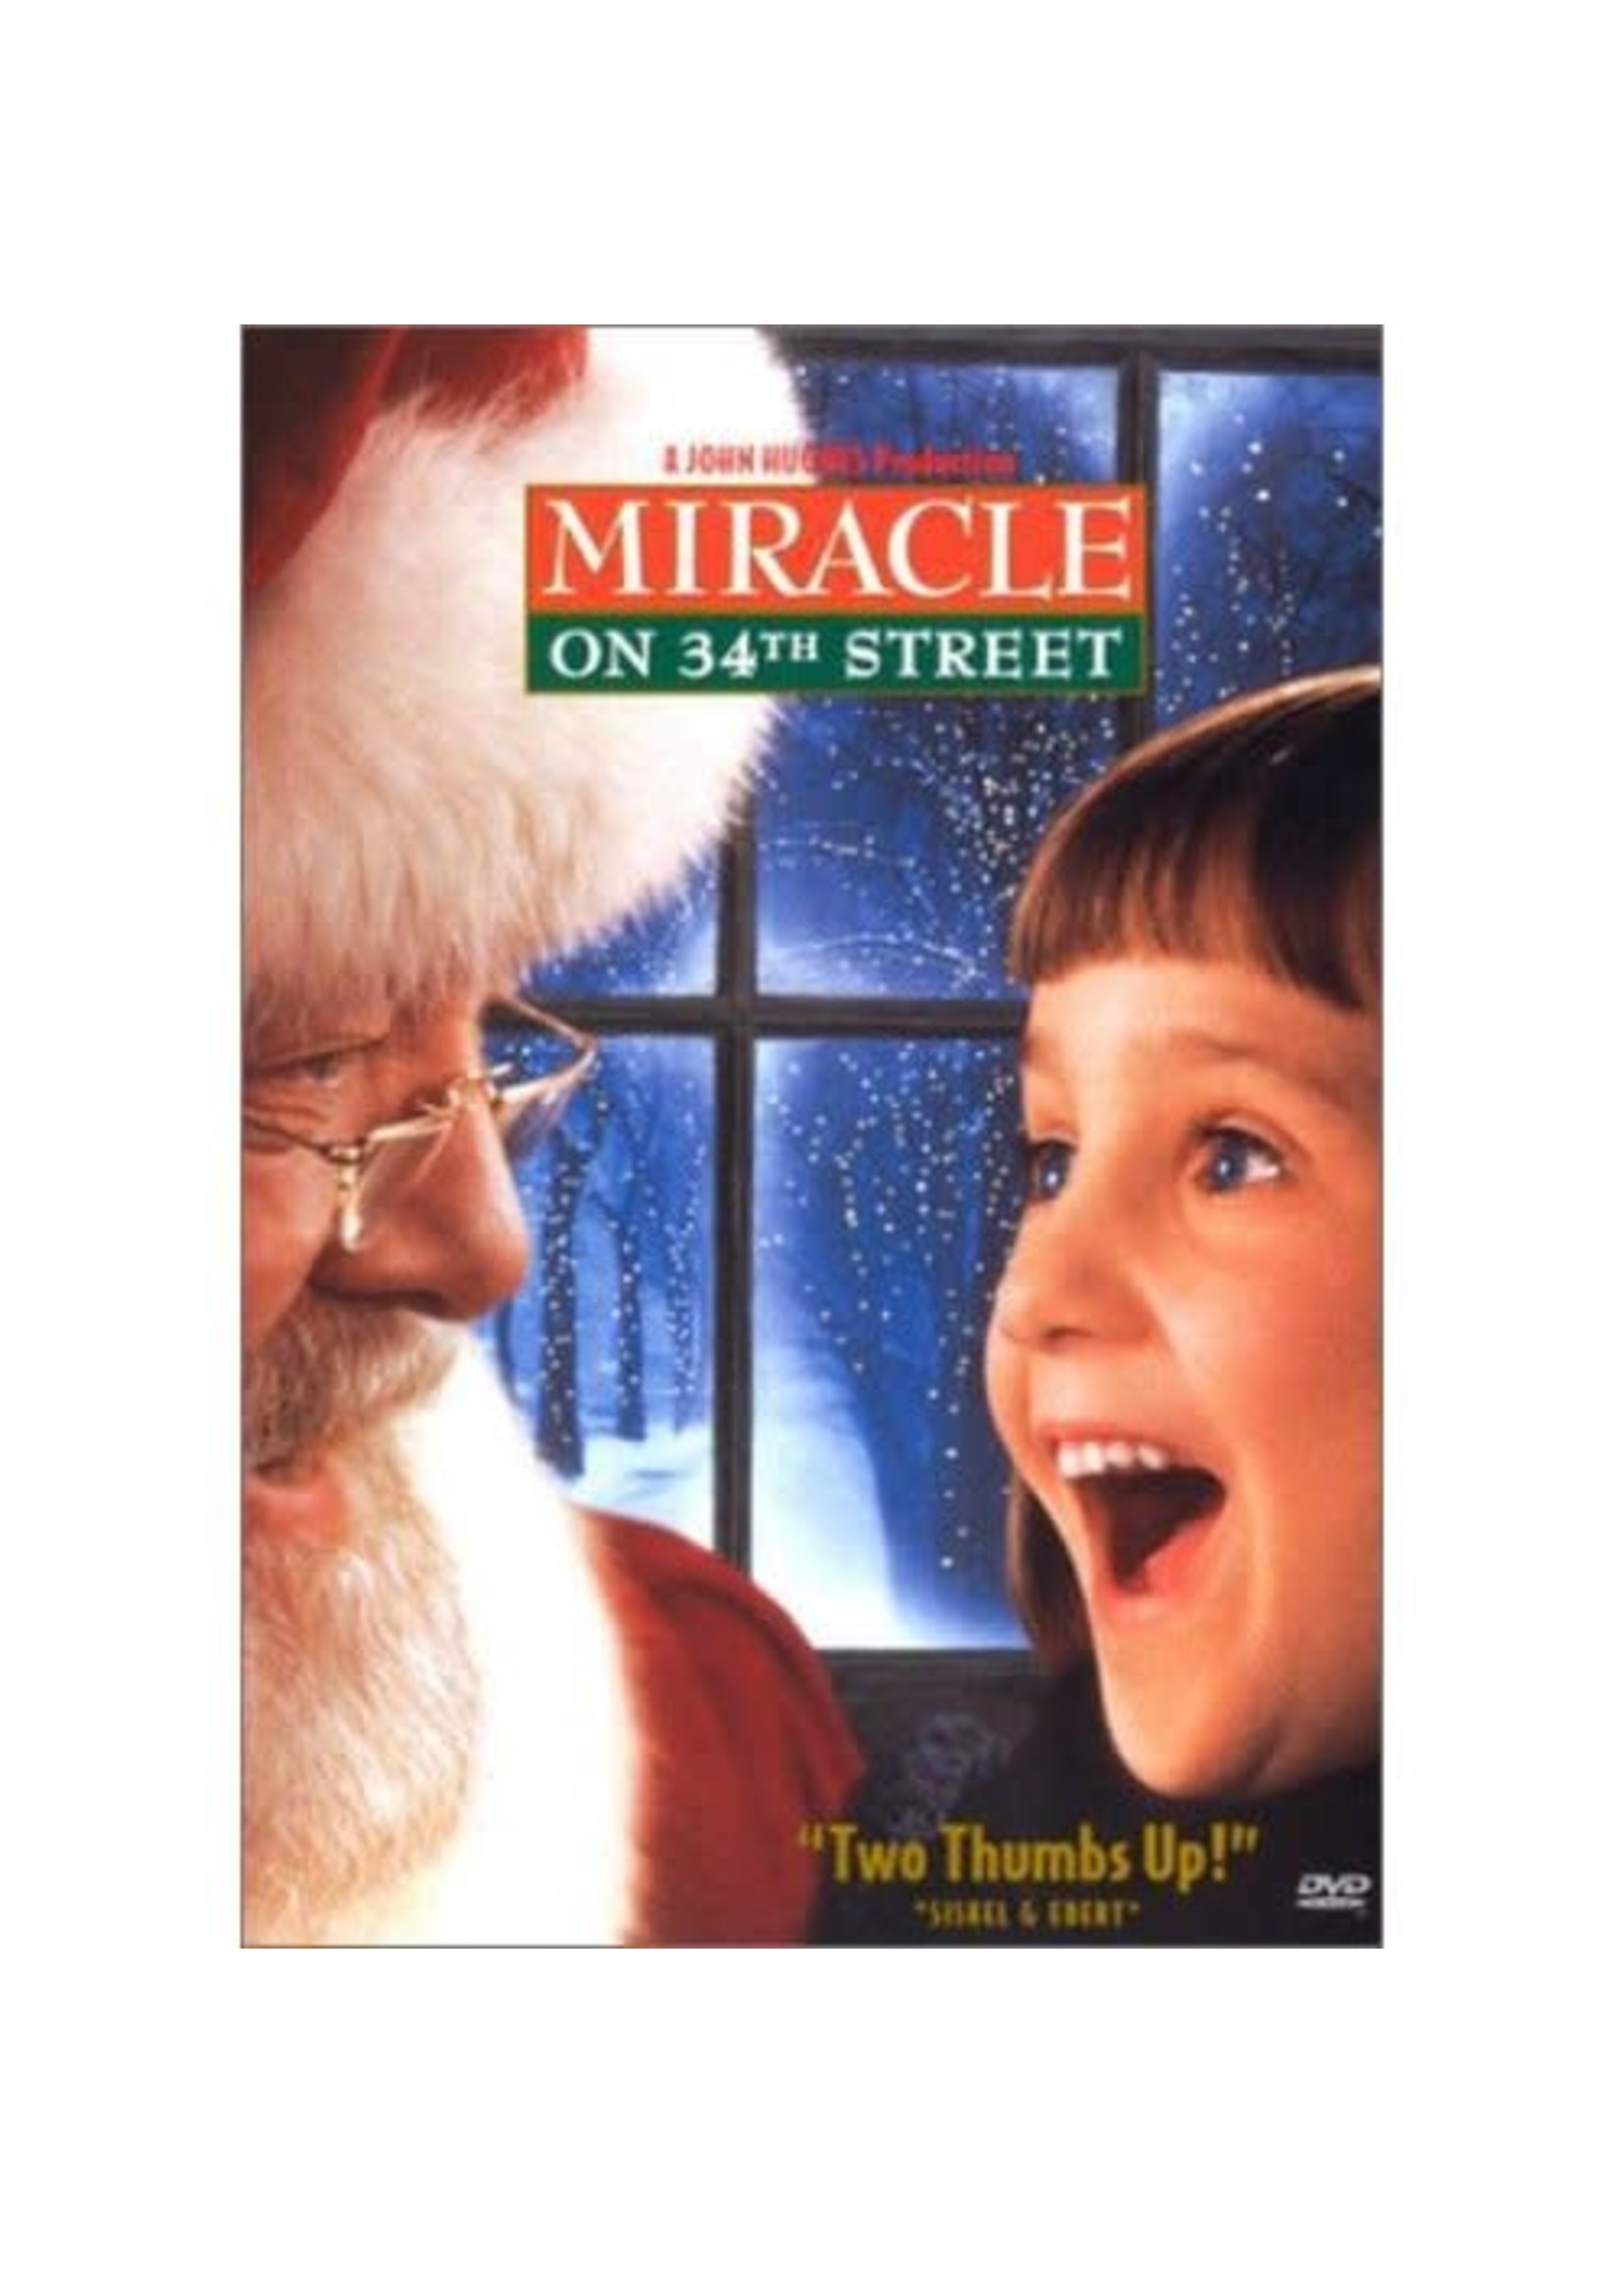 Miracle on 34th Street (Widescreen) DVD